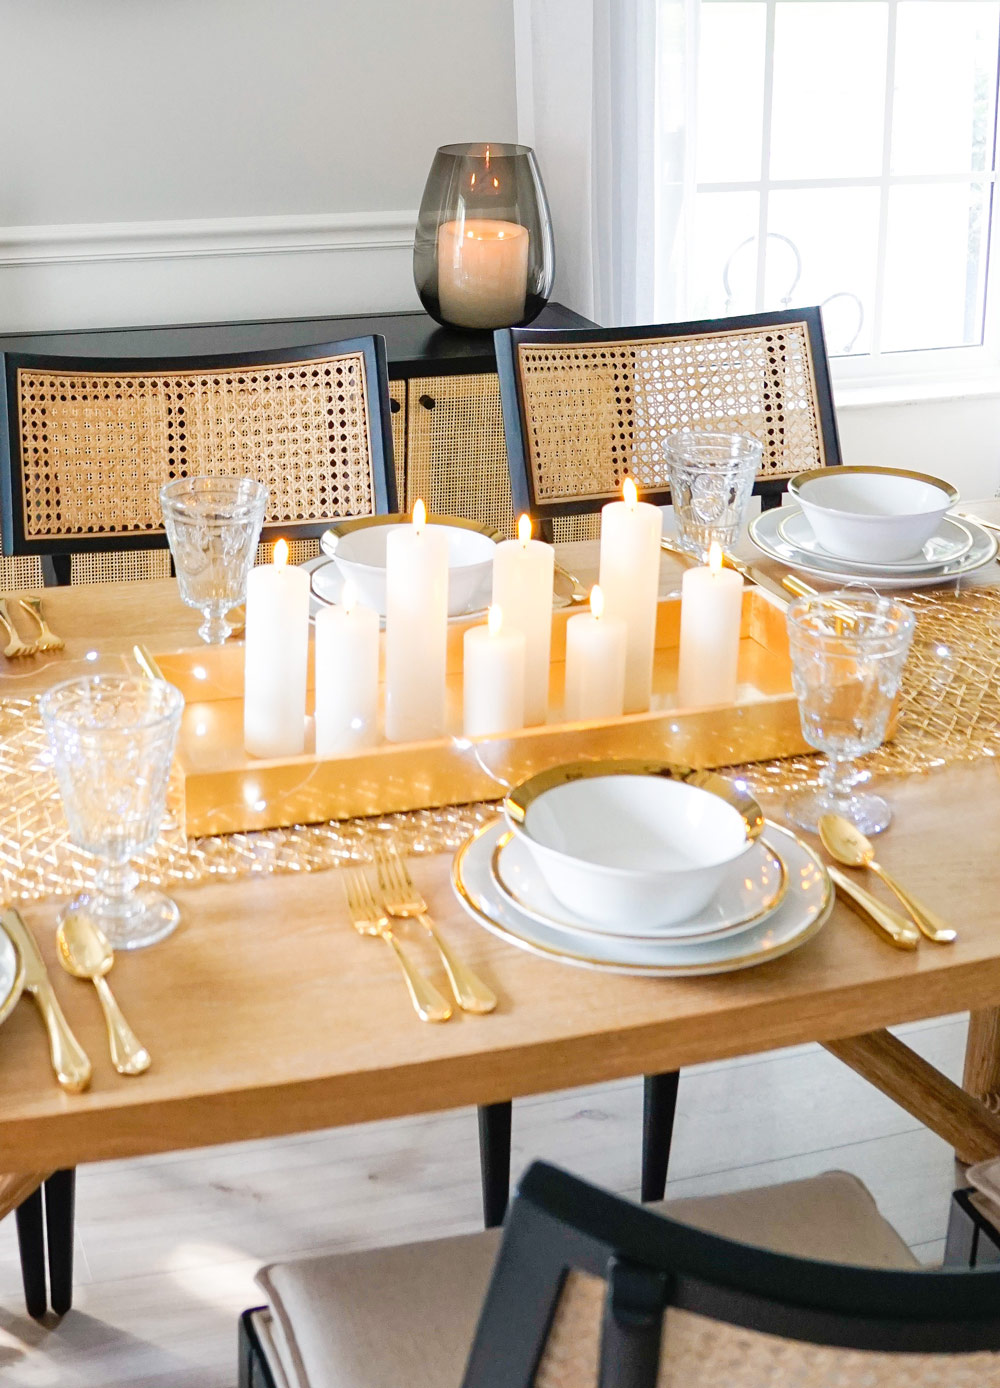 Table decorated with dinnerware, gold flatware, glasses, and a gold tray filled with candles.